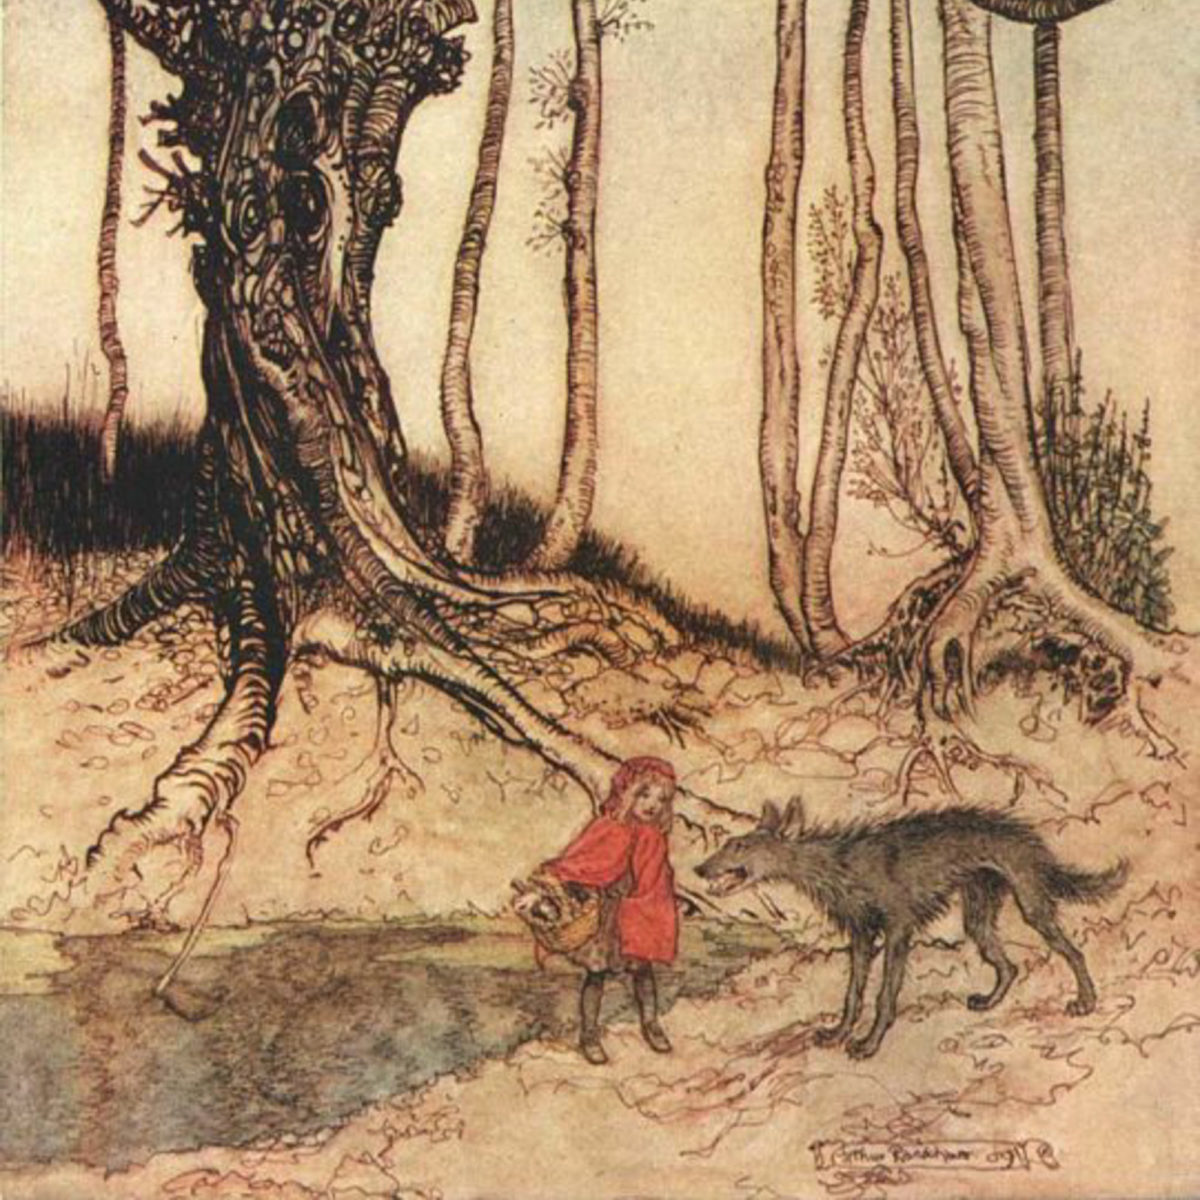 an illustration of red riding hood and wolf in a forrest